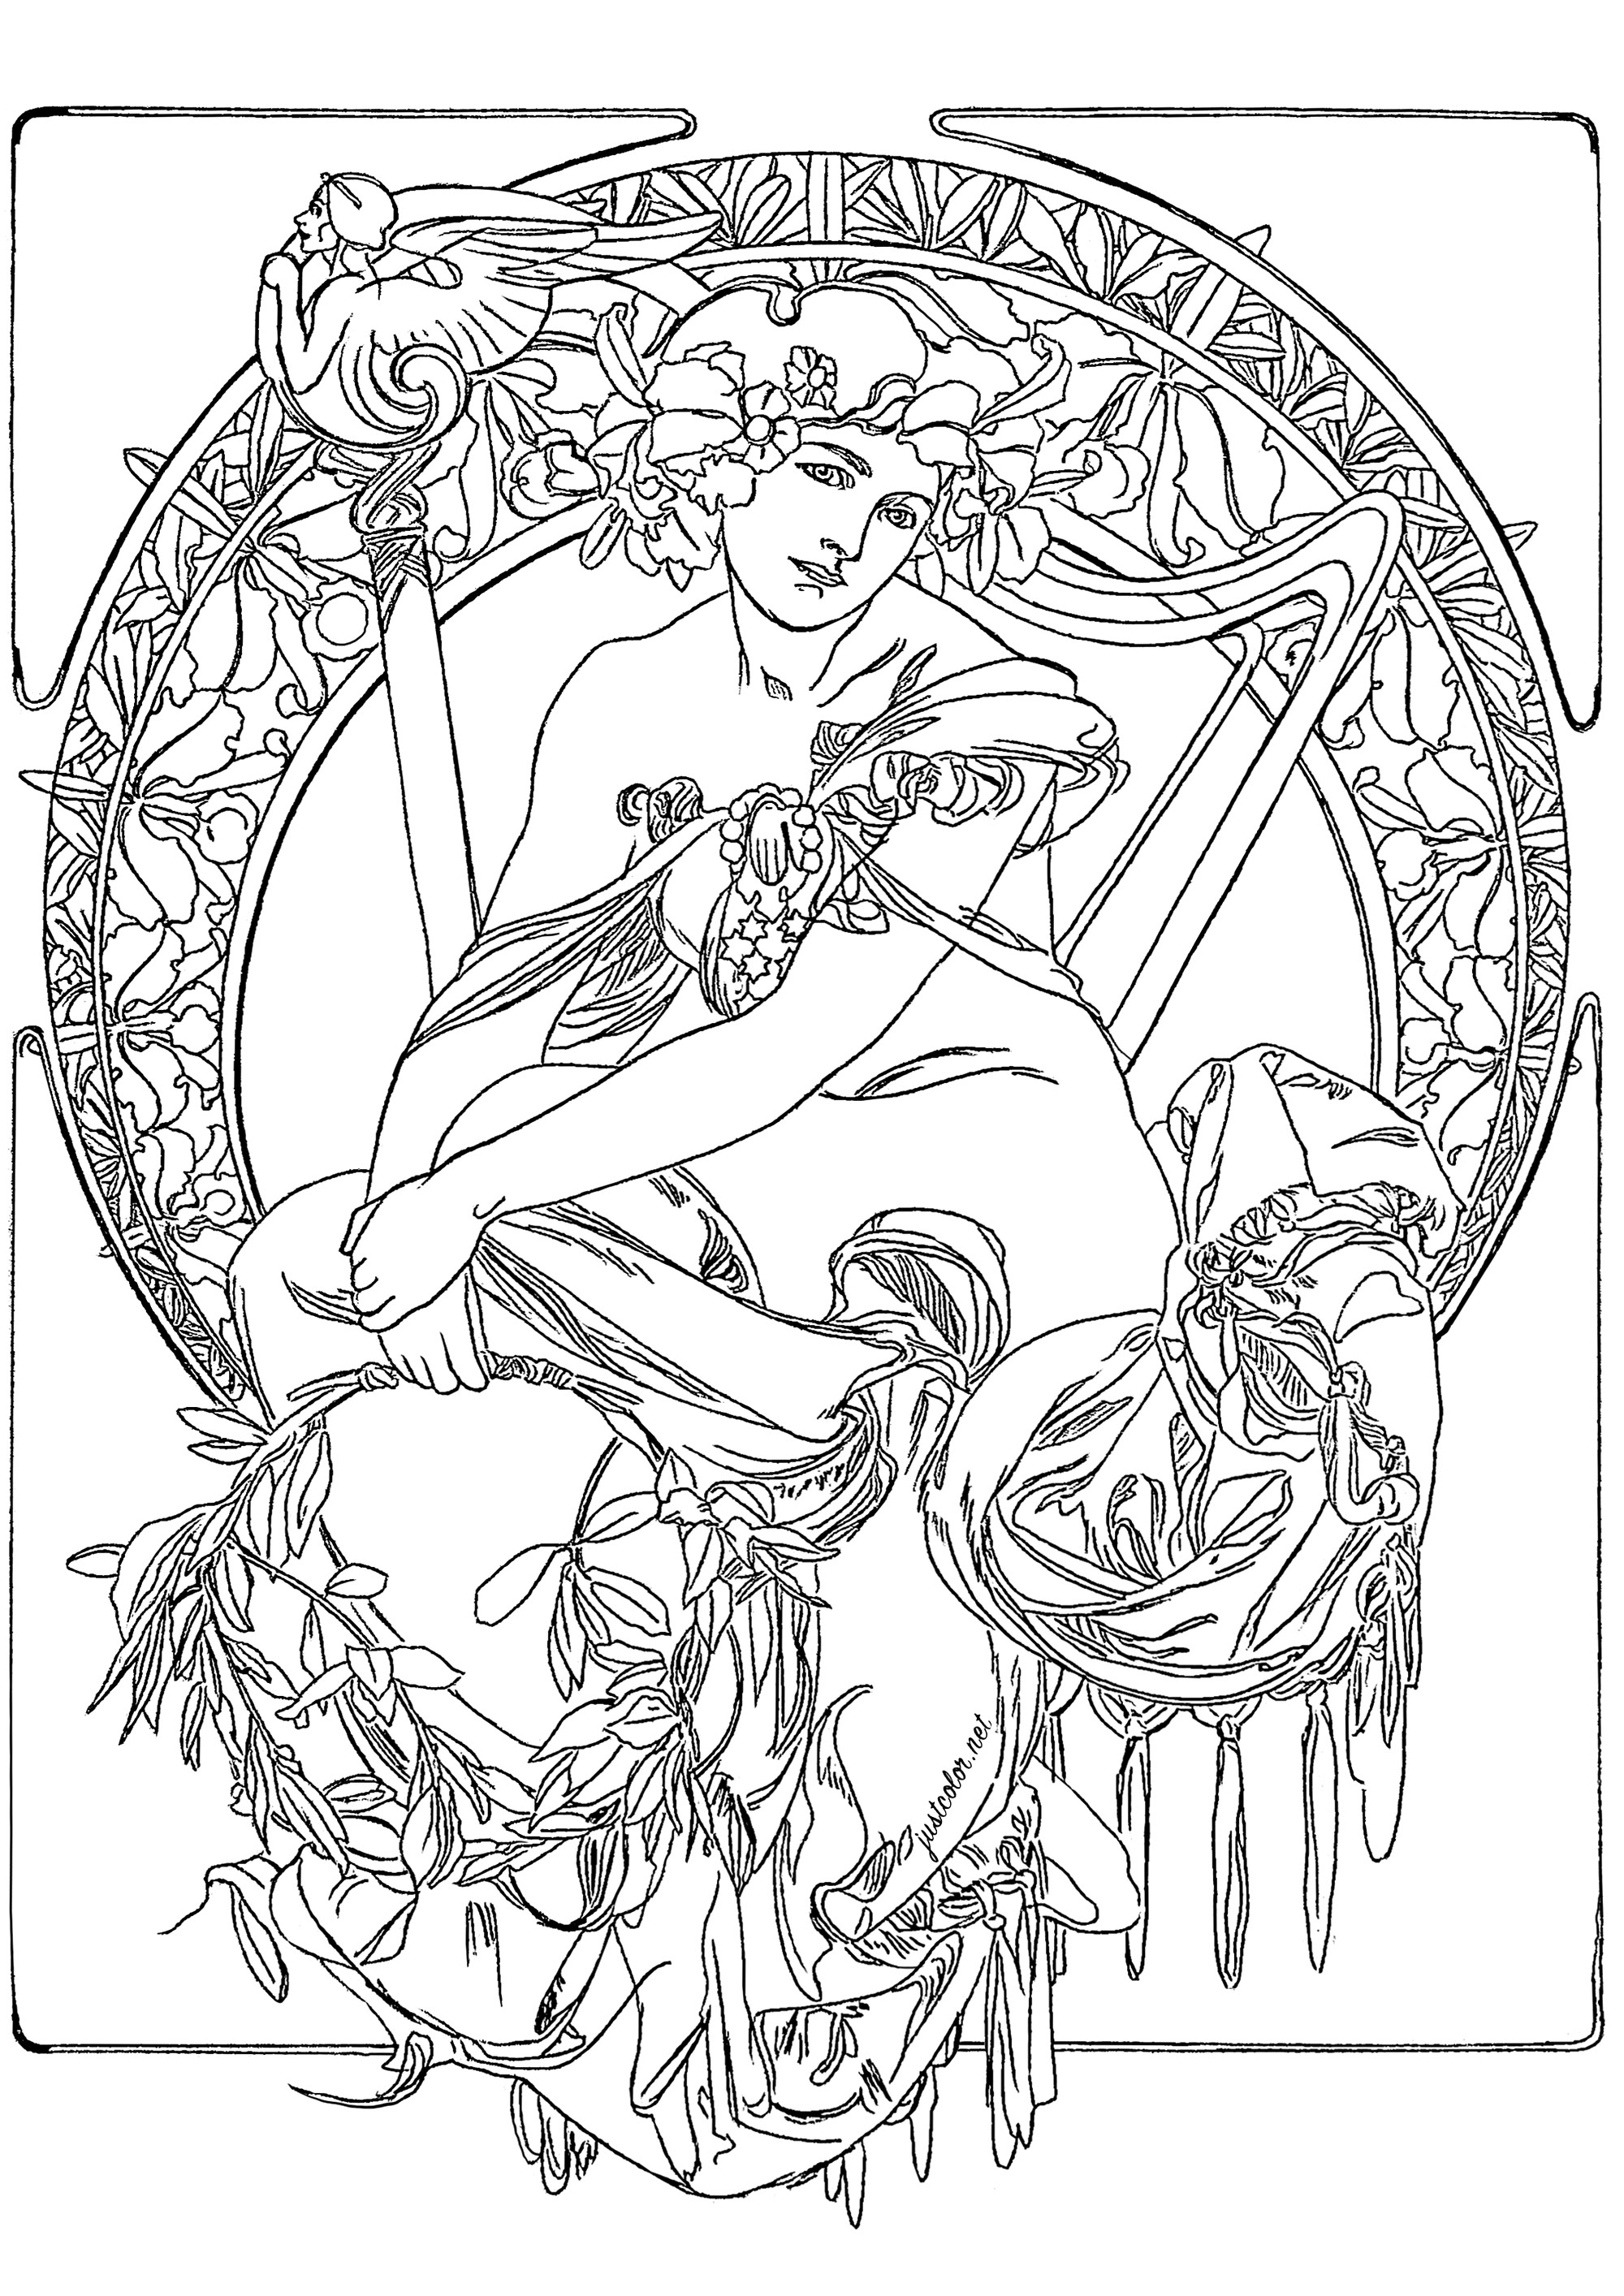 Alfons Mucha - Design for musical poster (1900). The composition is based on a central circle, surrounded by a series of floral and geometric motifs. In the central circle, a female figure can be seen, whose clothes are decorated with floral motifs and a crown of leaves and flowers. Although this is a sketch, the details are very precise and reflect Mucha's finesse and attention to detail. (The original drawing has been slightly reworked to allow for coloring)